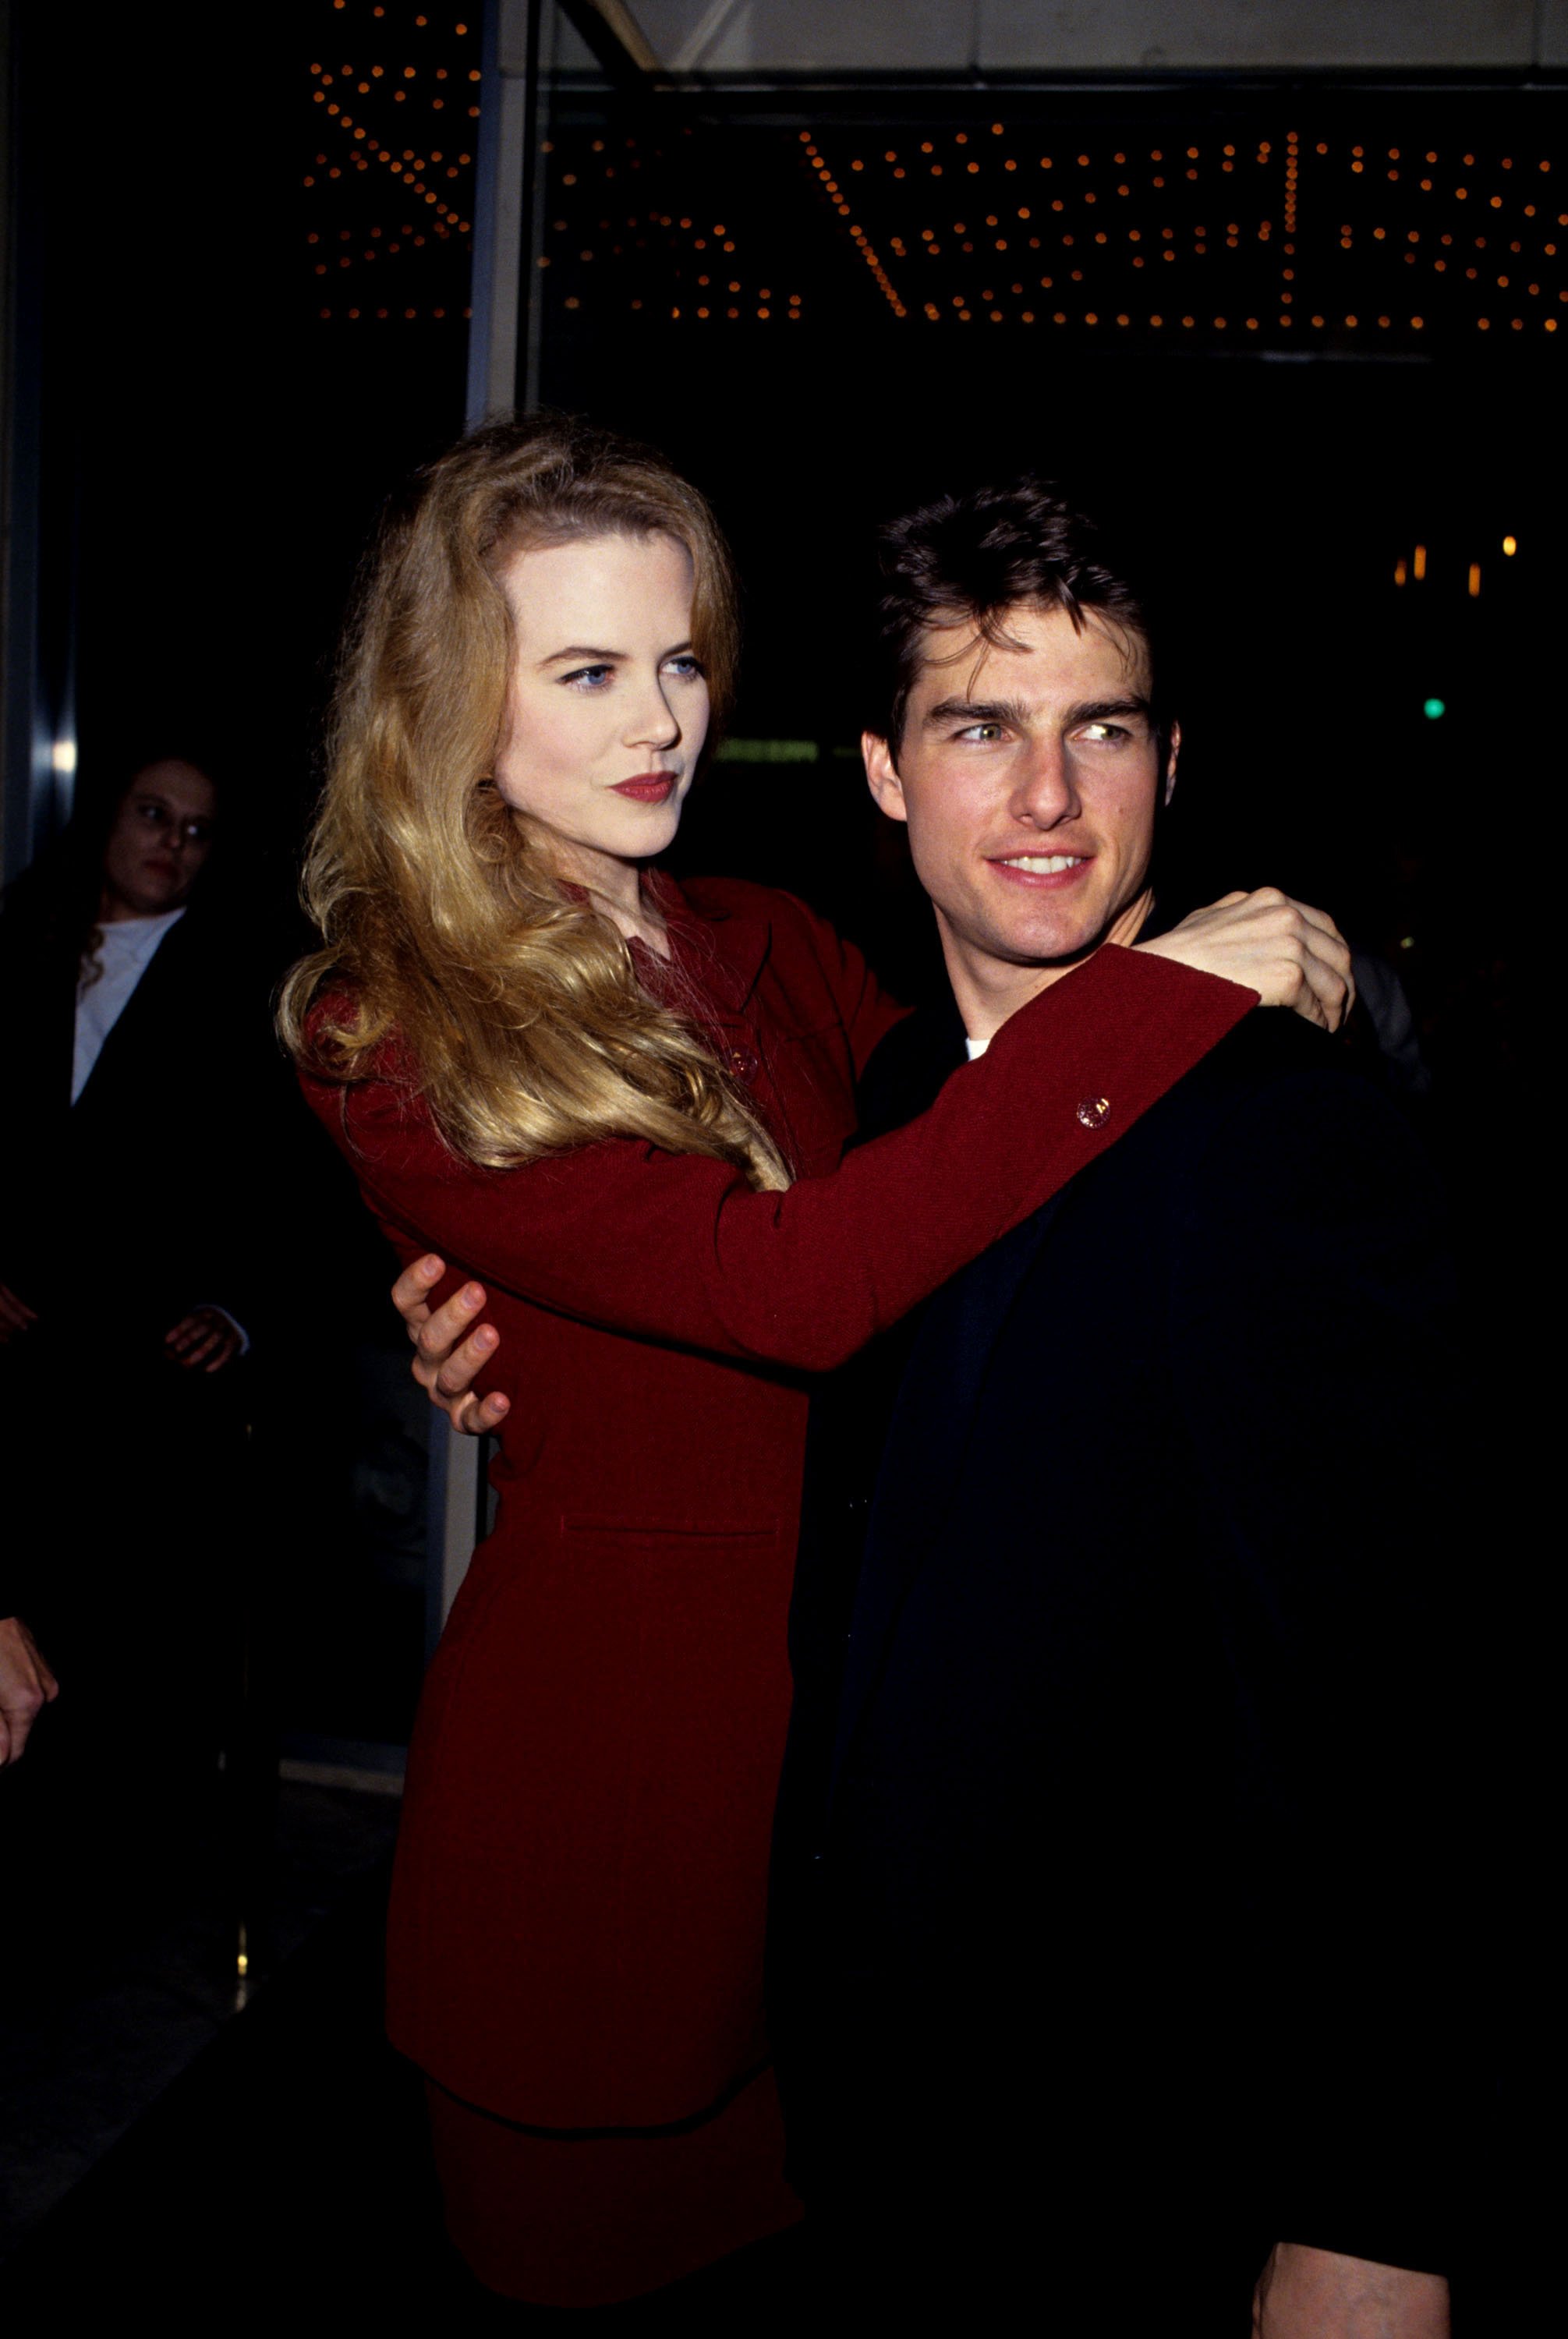 Nicole Kidman and Tom Cruise at the Premiere of ""A Few Good Men"" at Mann's Village Theater in Westwood, California, United States. | Source: Getty Images